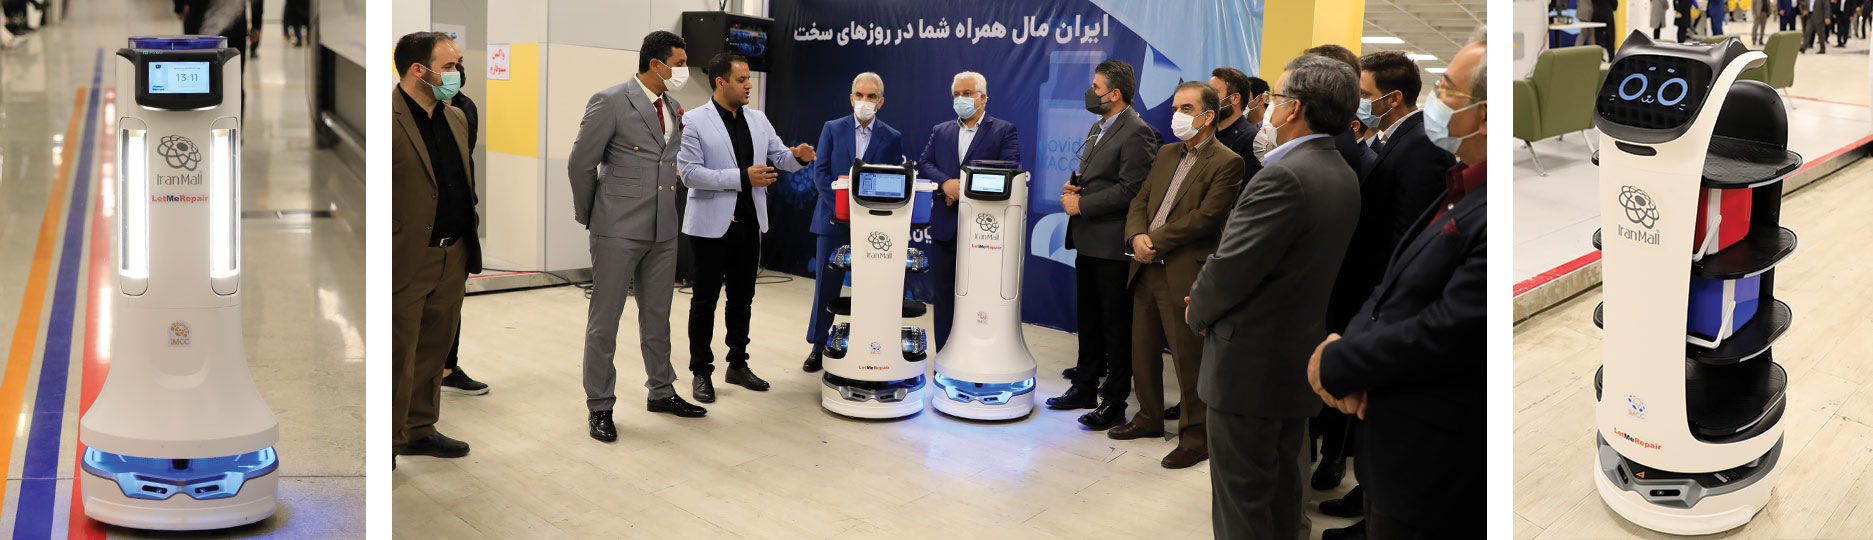 Unveiling of robots in the vaccination center of Iran Mall Exhibition Center